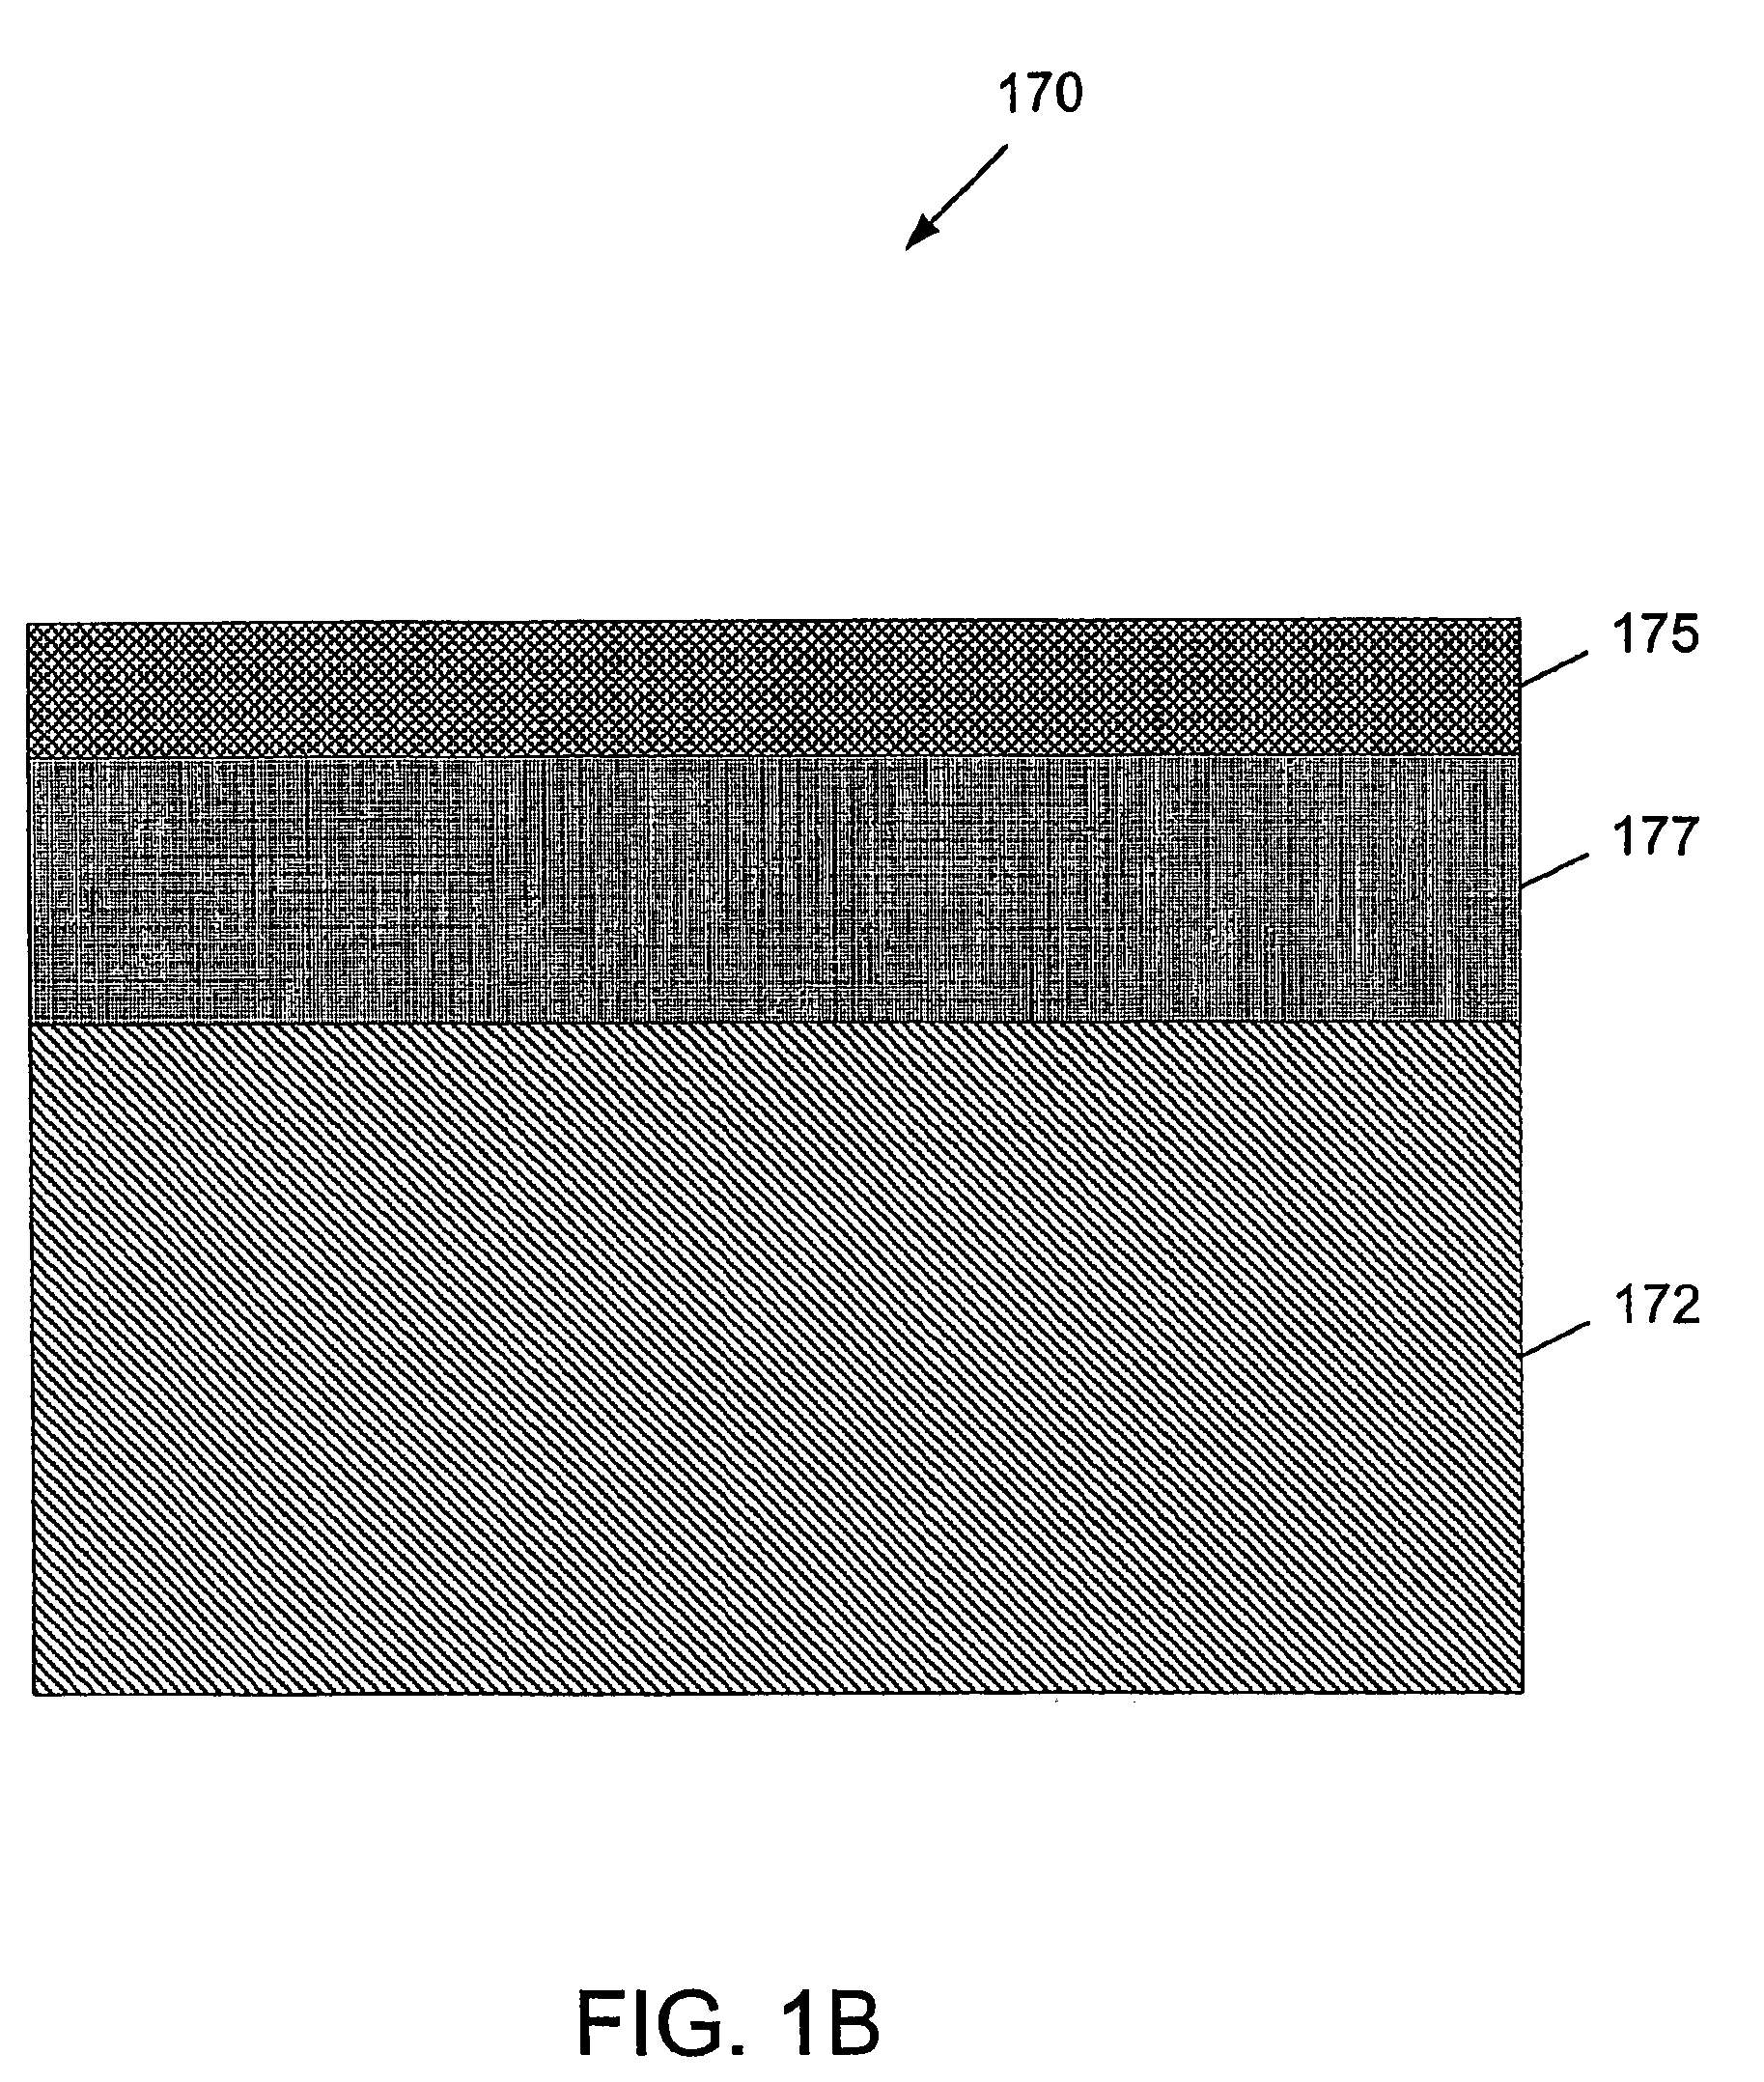 Process and system for laser crystallization processing of film regions on a substrate to provide substantial uniformity, and a structure of such film regions